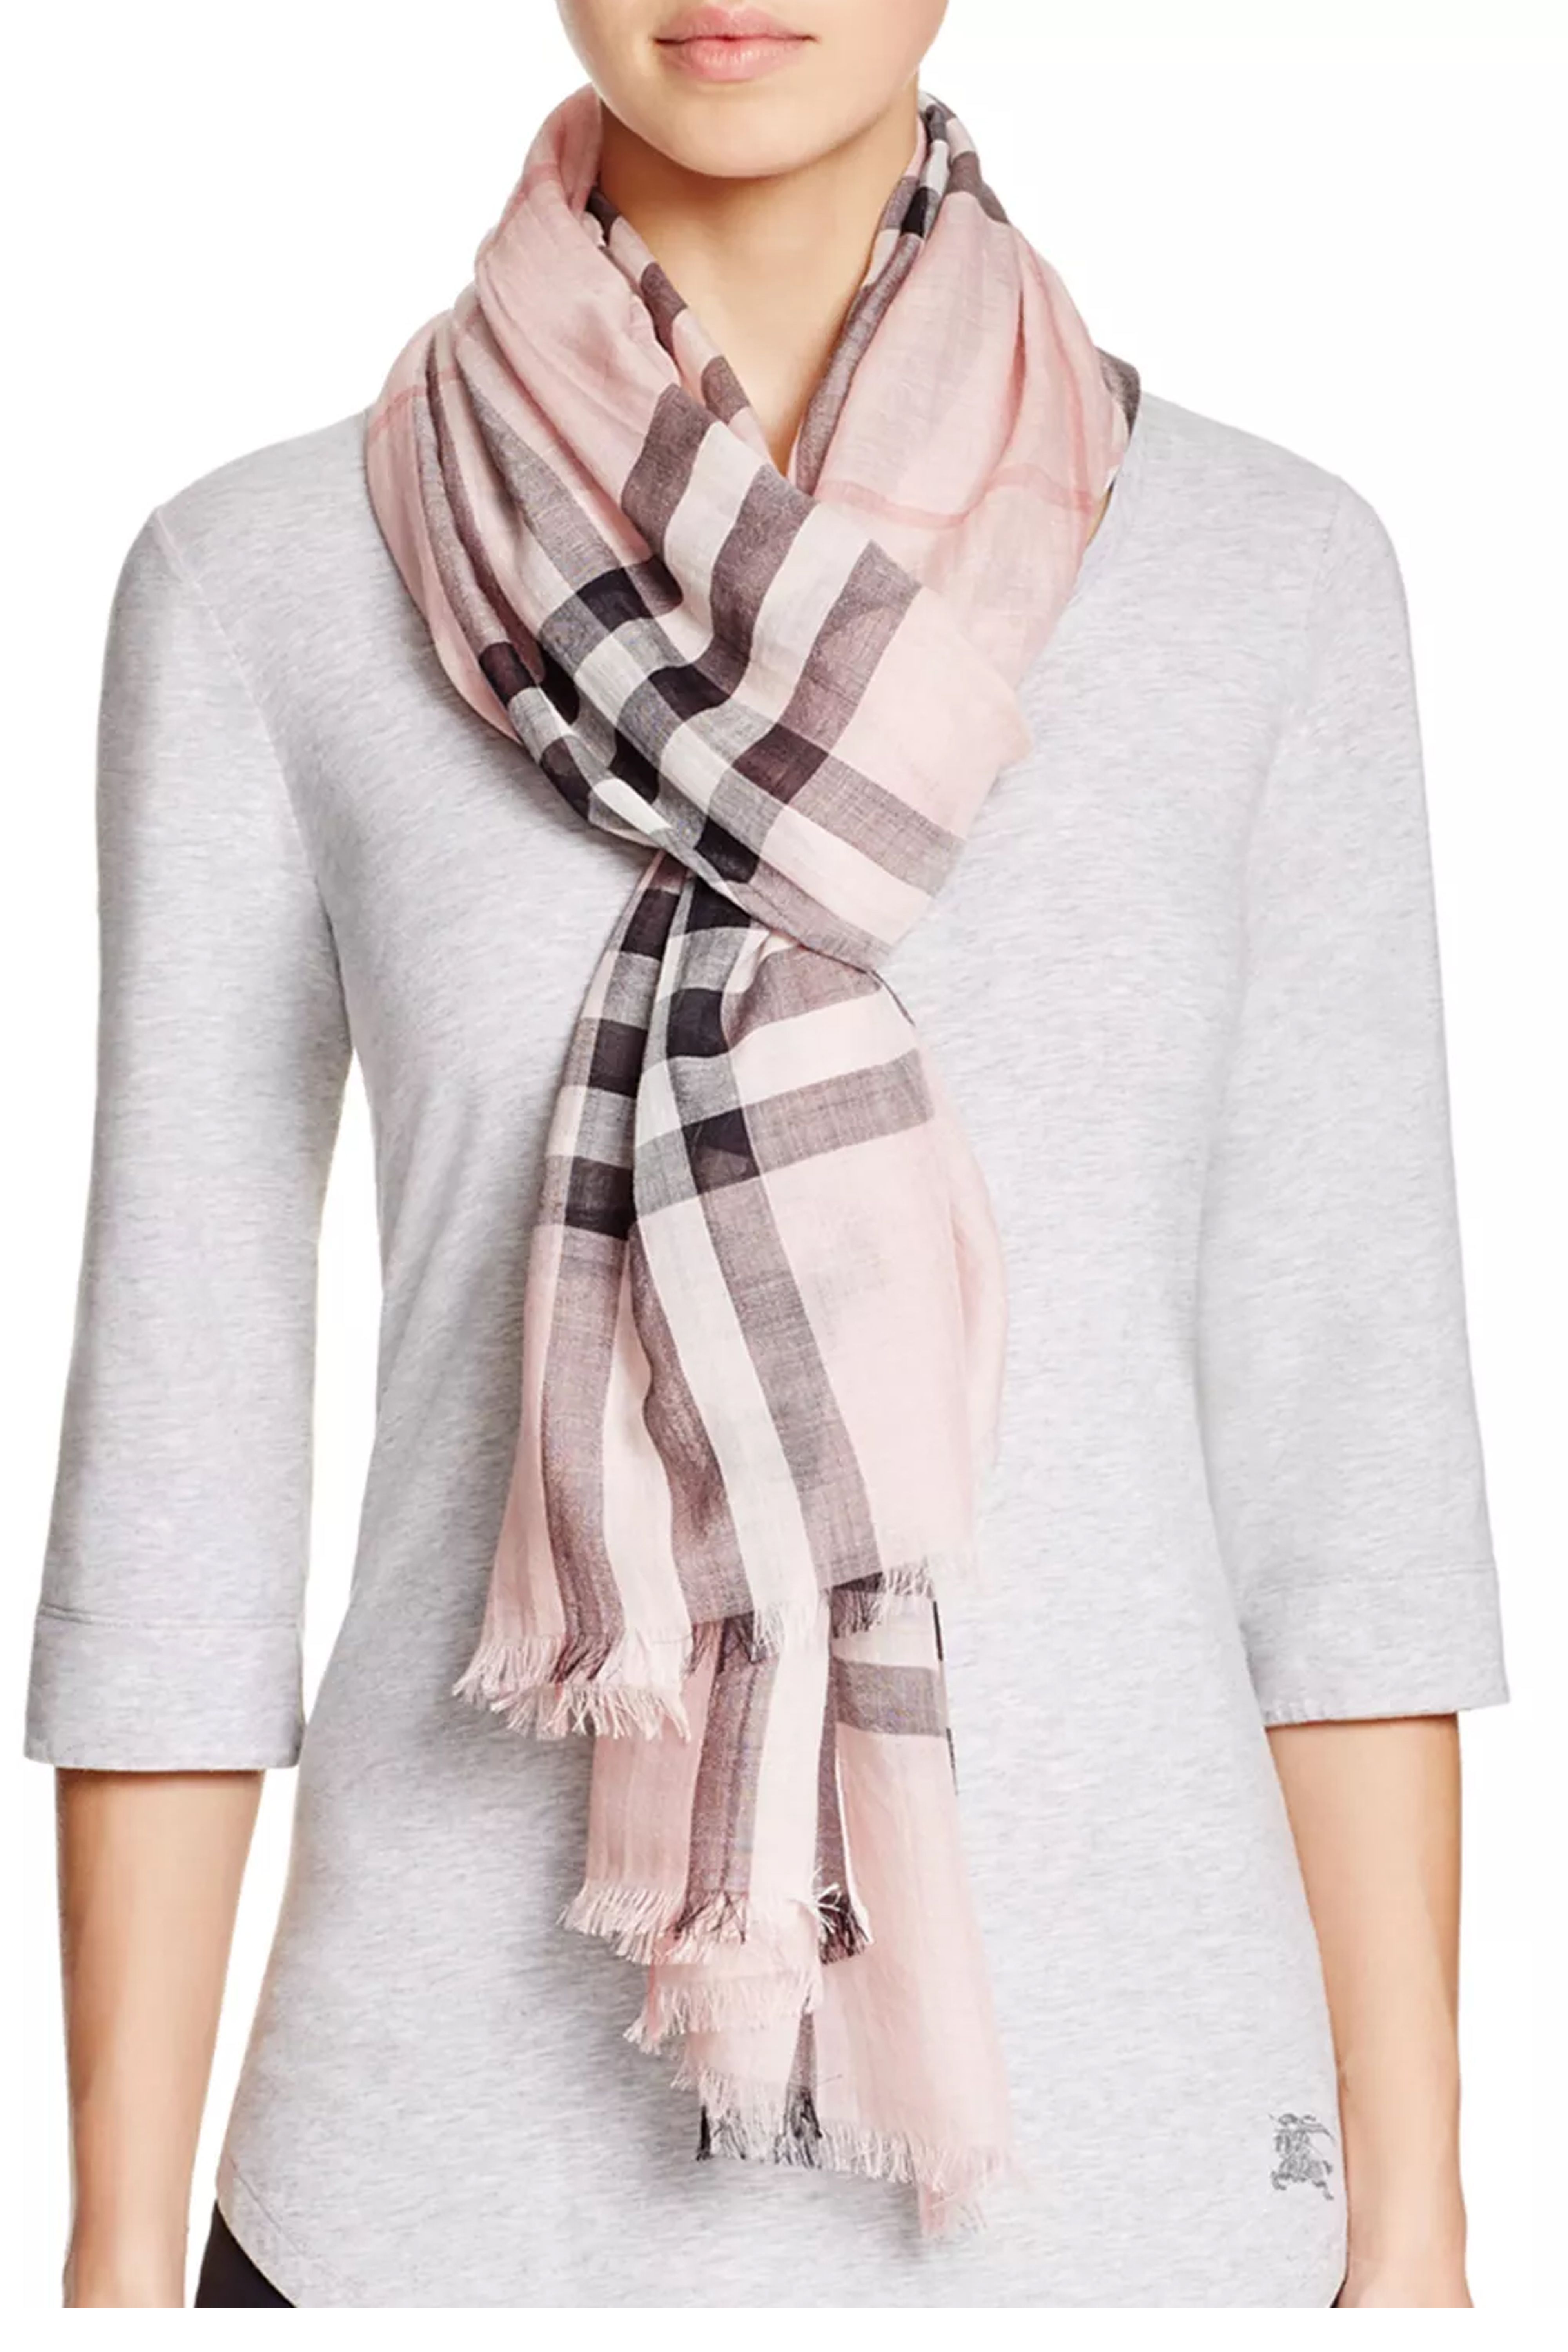 burberry hot pink scarf